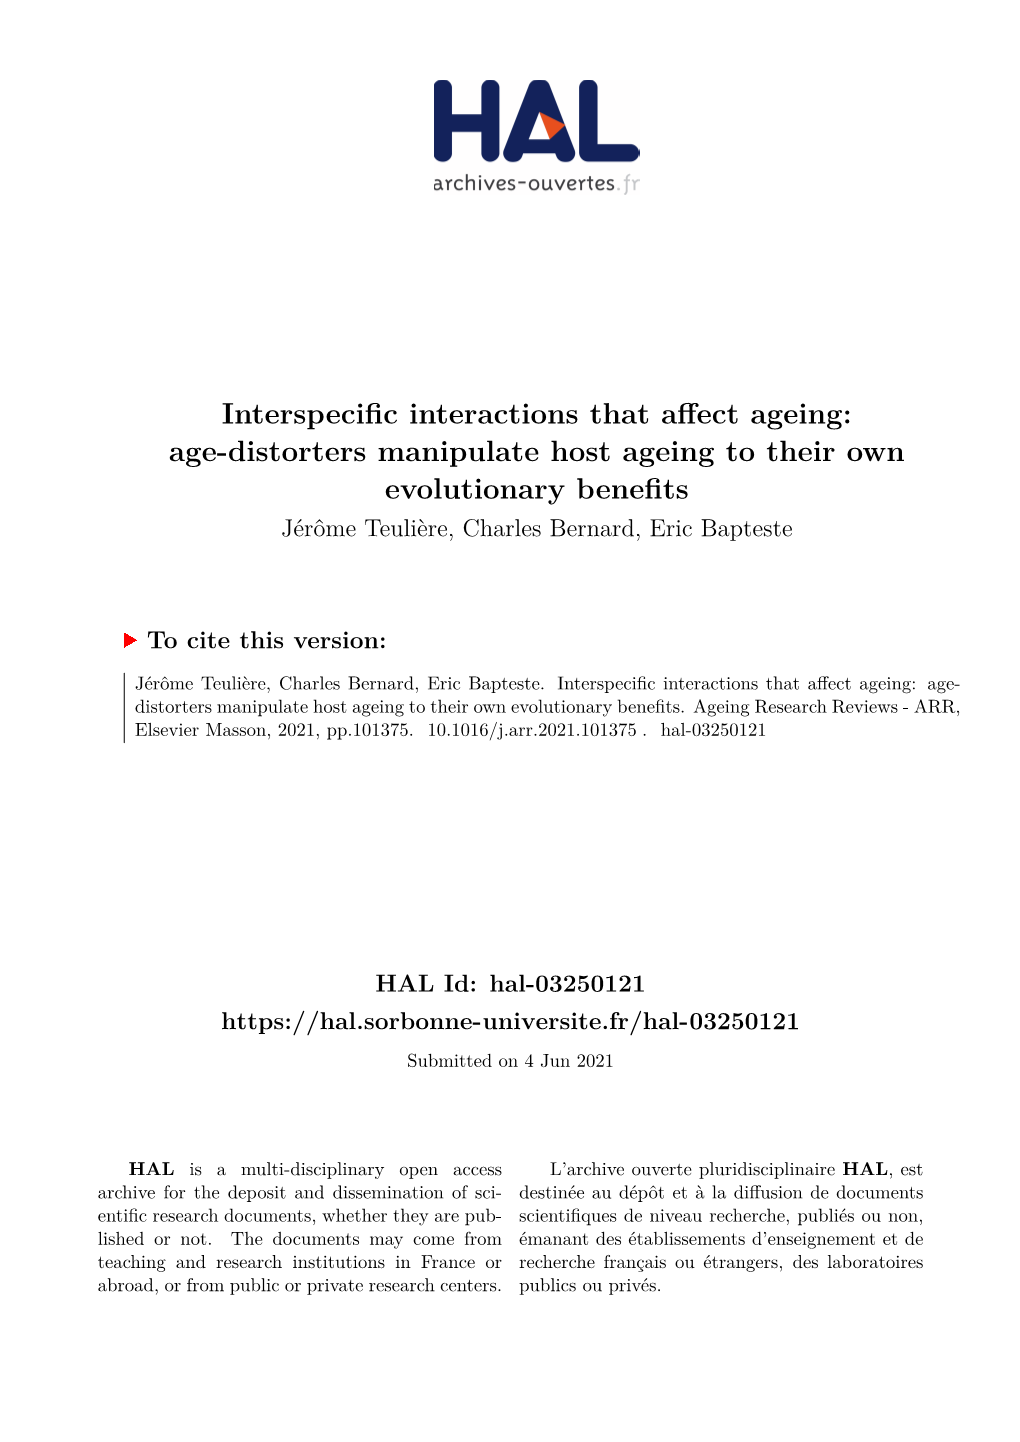 Interspecific Interactions That Affect Ageing